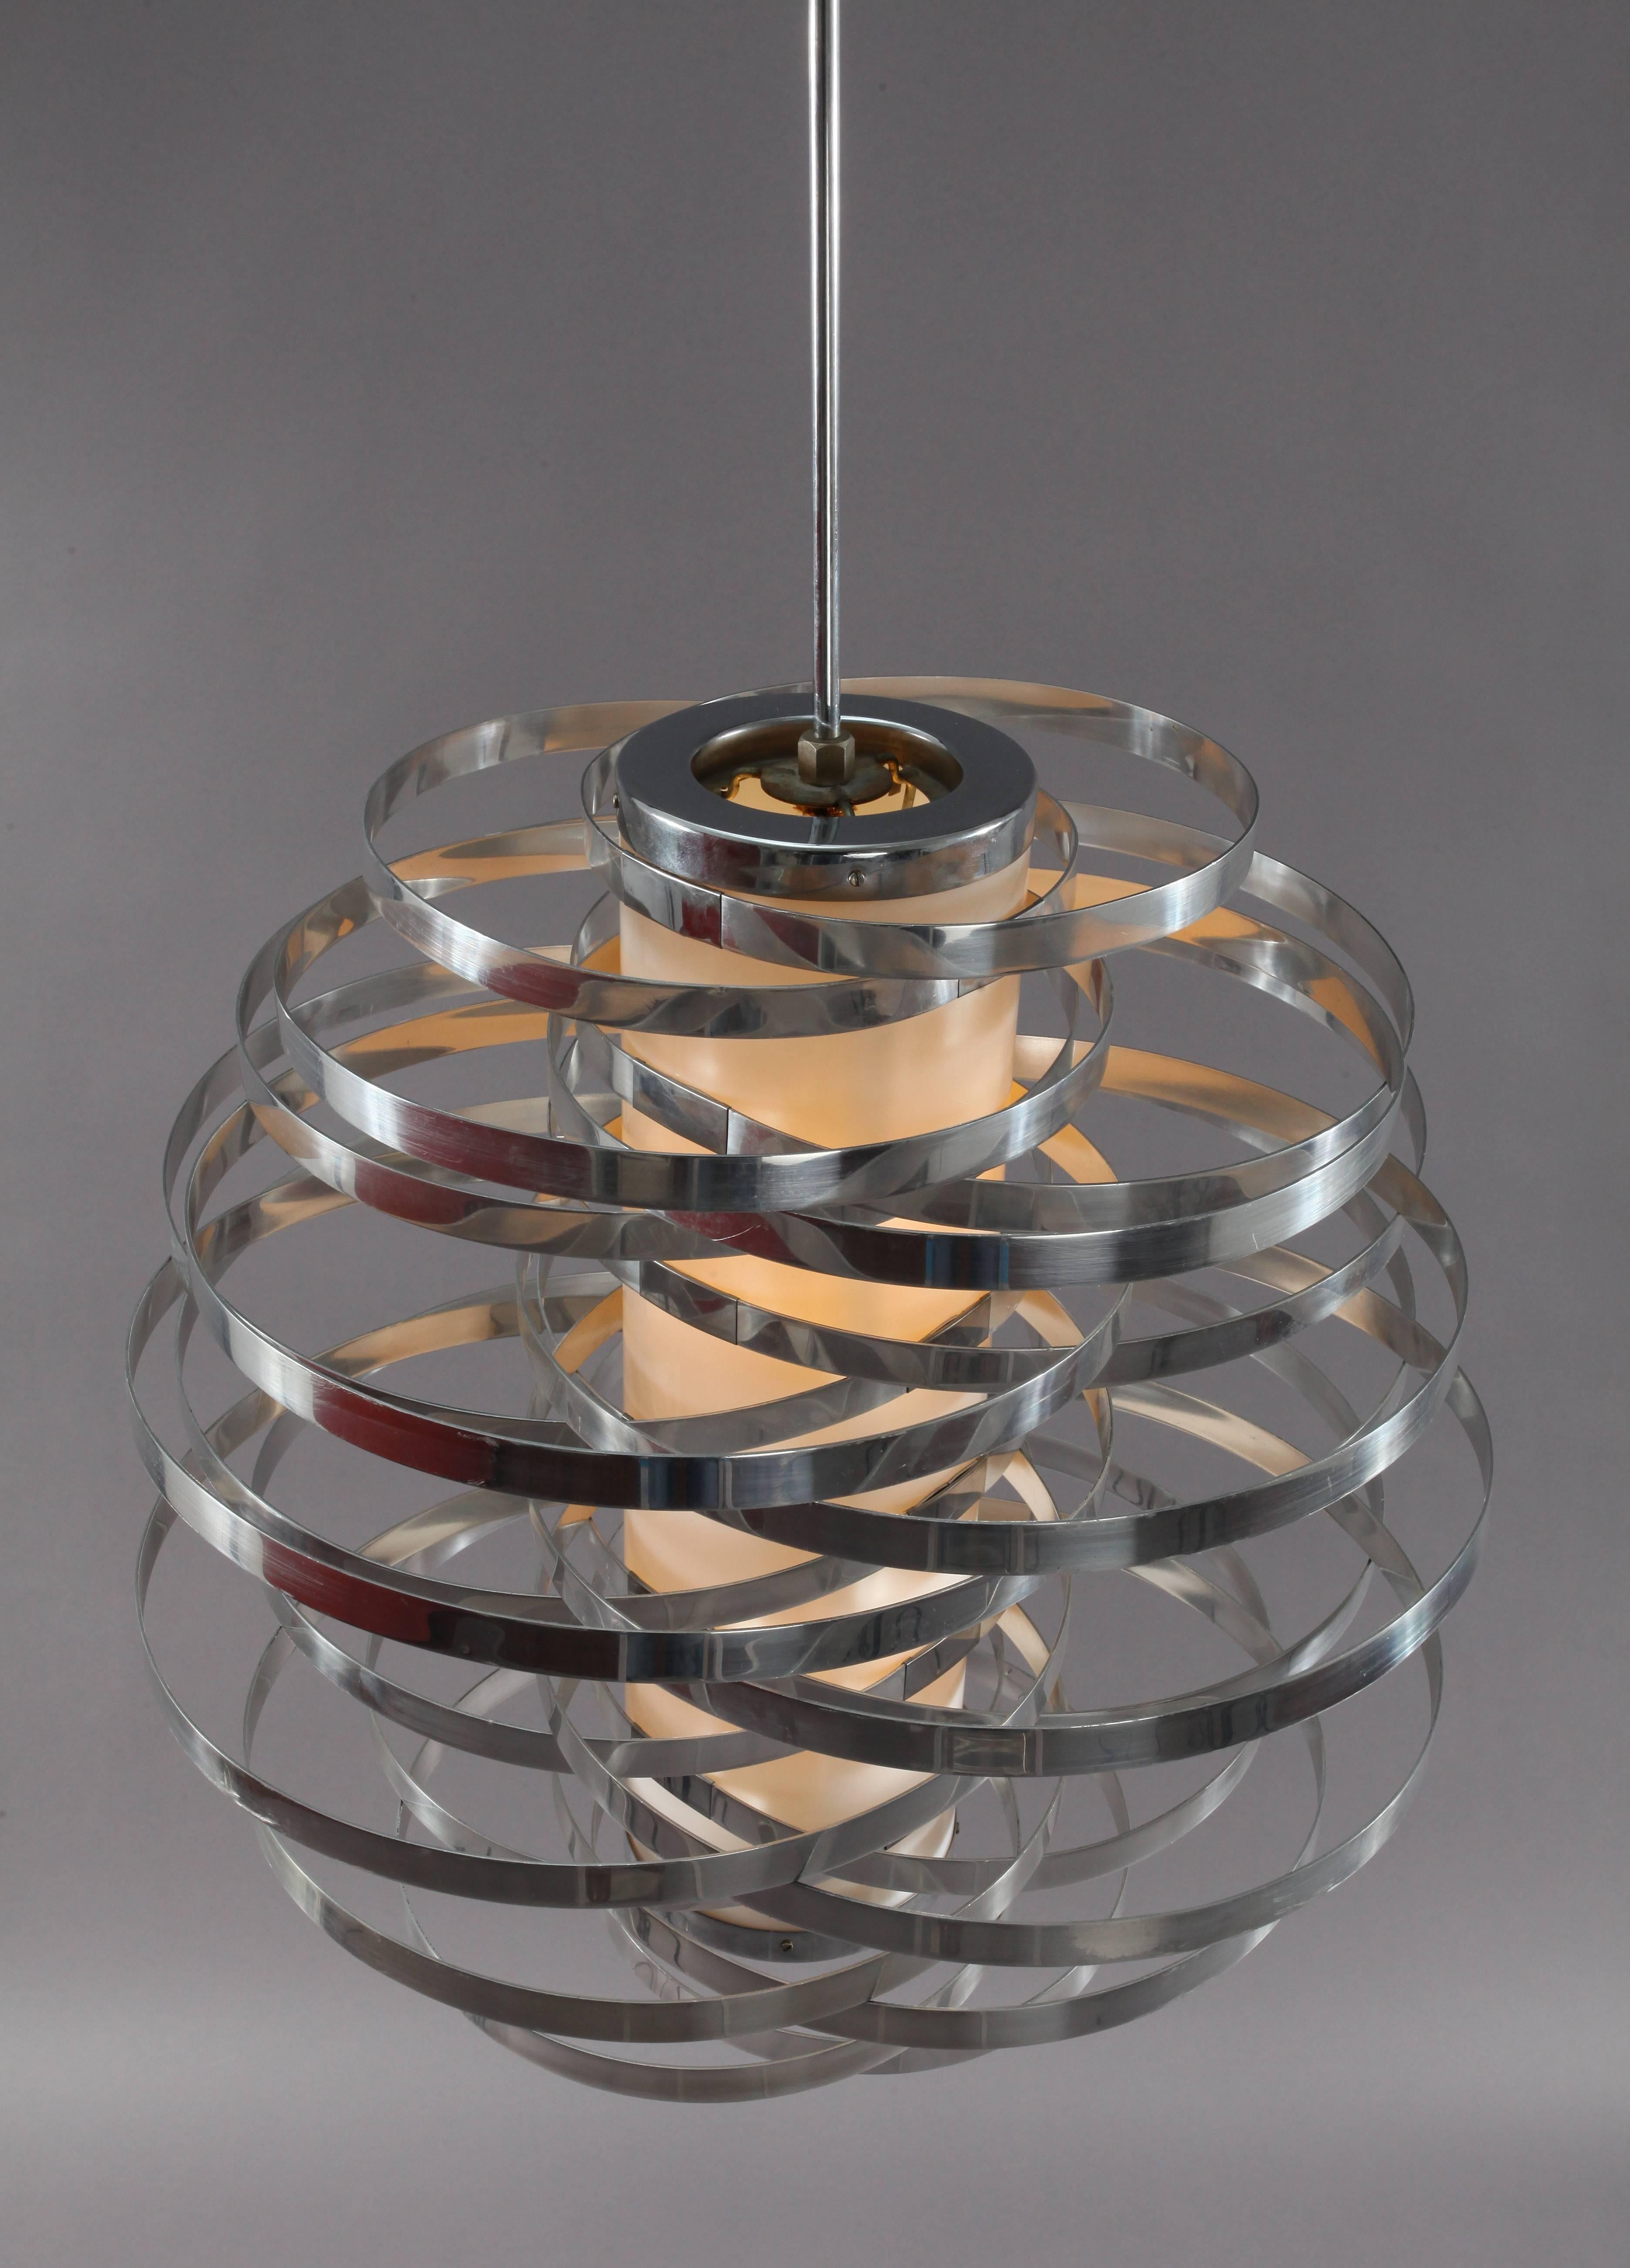 Mid-Century Modern Chandelier in Polished Aluminium and Acryl by Max Sauze for Sciolari Roma